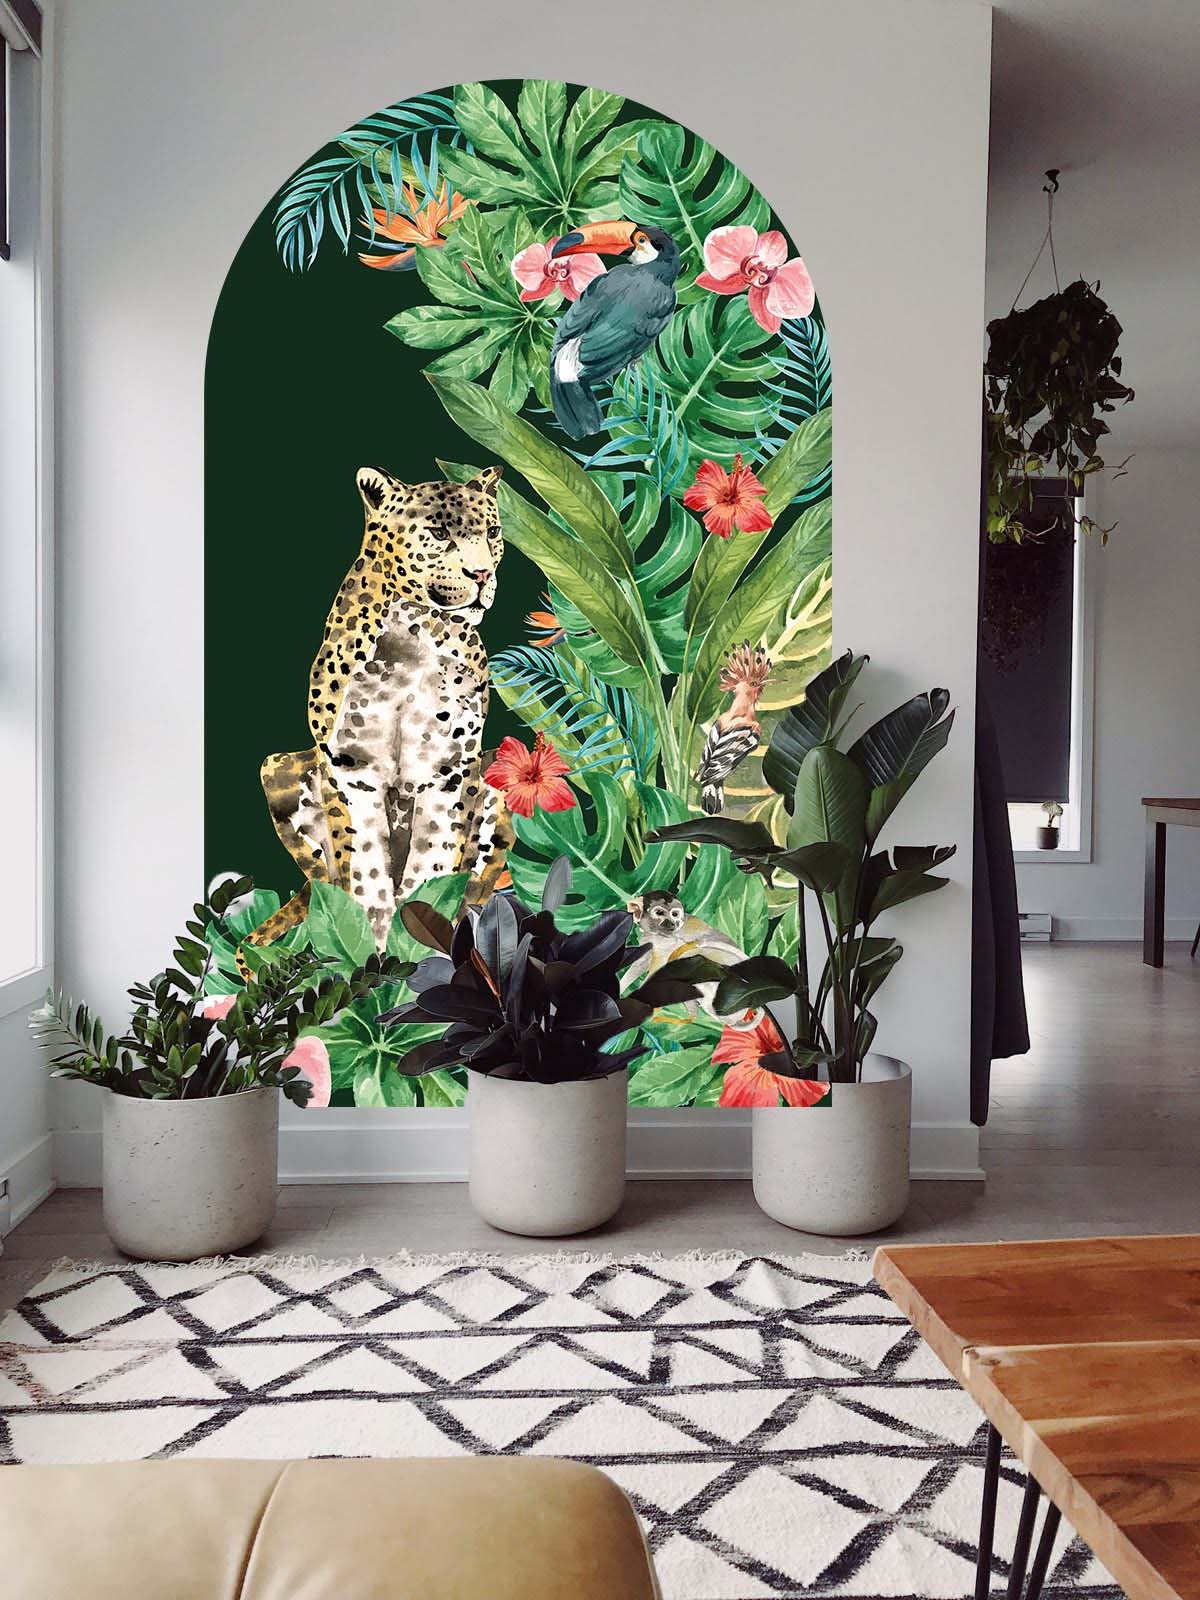 Boho Tropical Arch Large Wall Decal Cheetah Cat Flowers, LKL0069